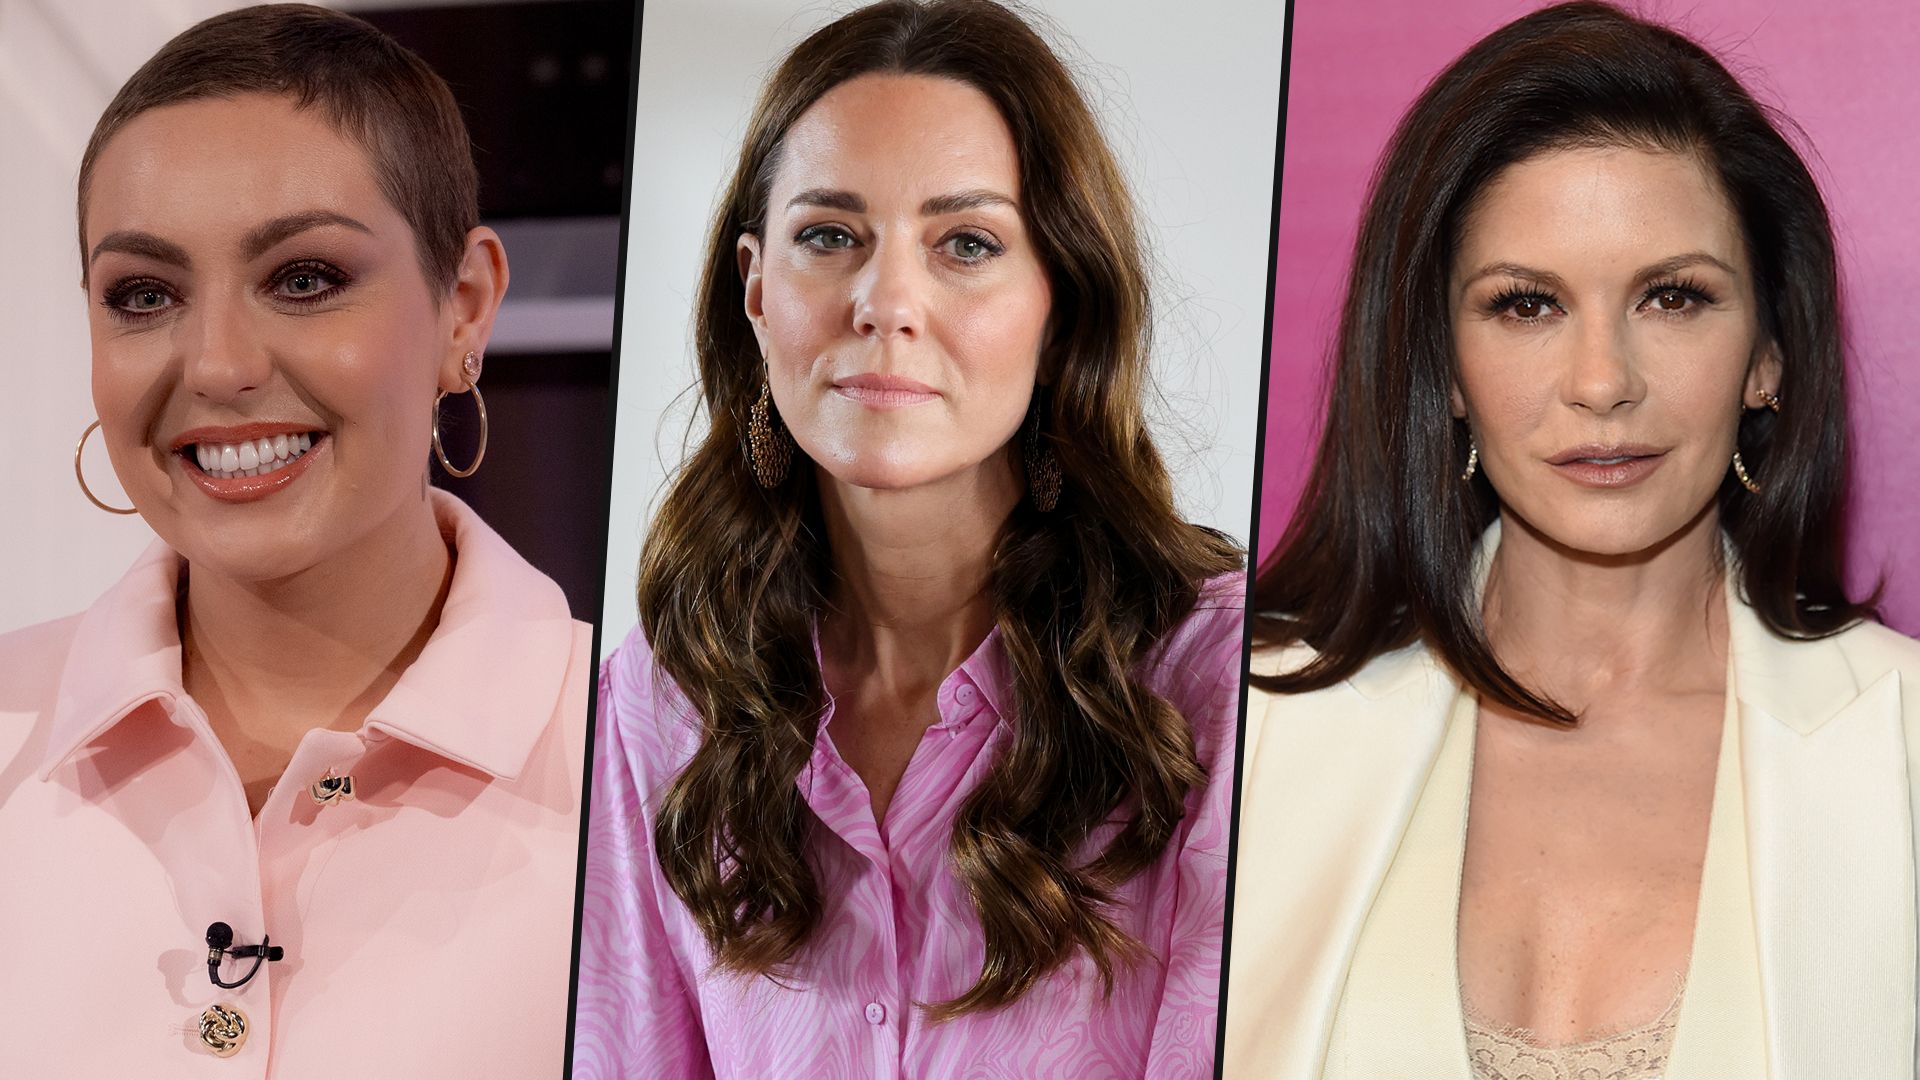 Amy Dowden, Catherine Zeta-Jones and more lead tributes after Princess Kate's cancer diagnosis